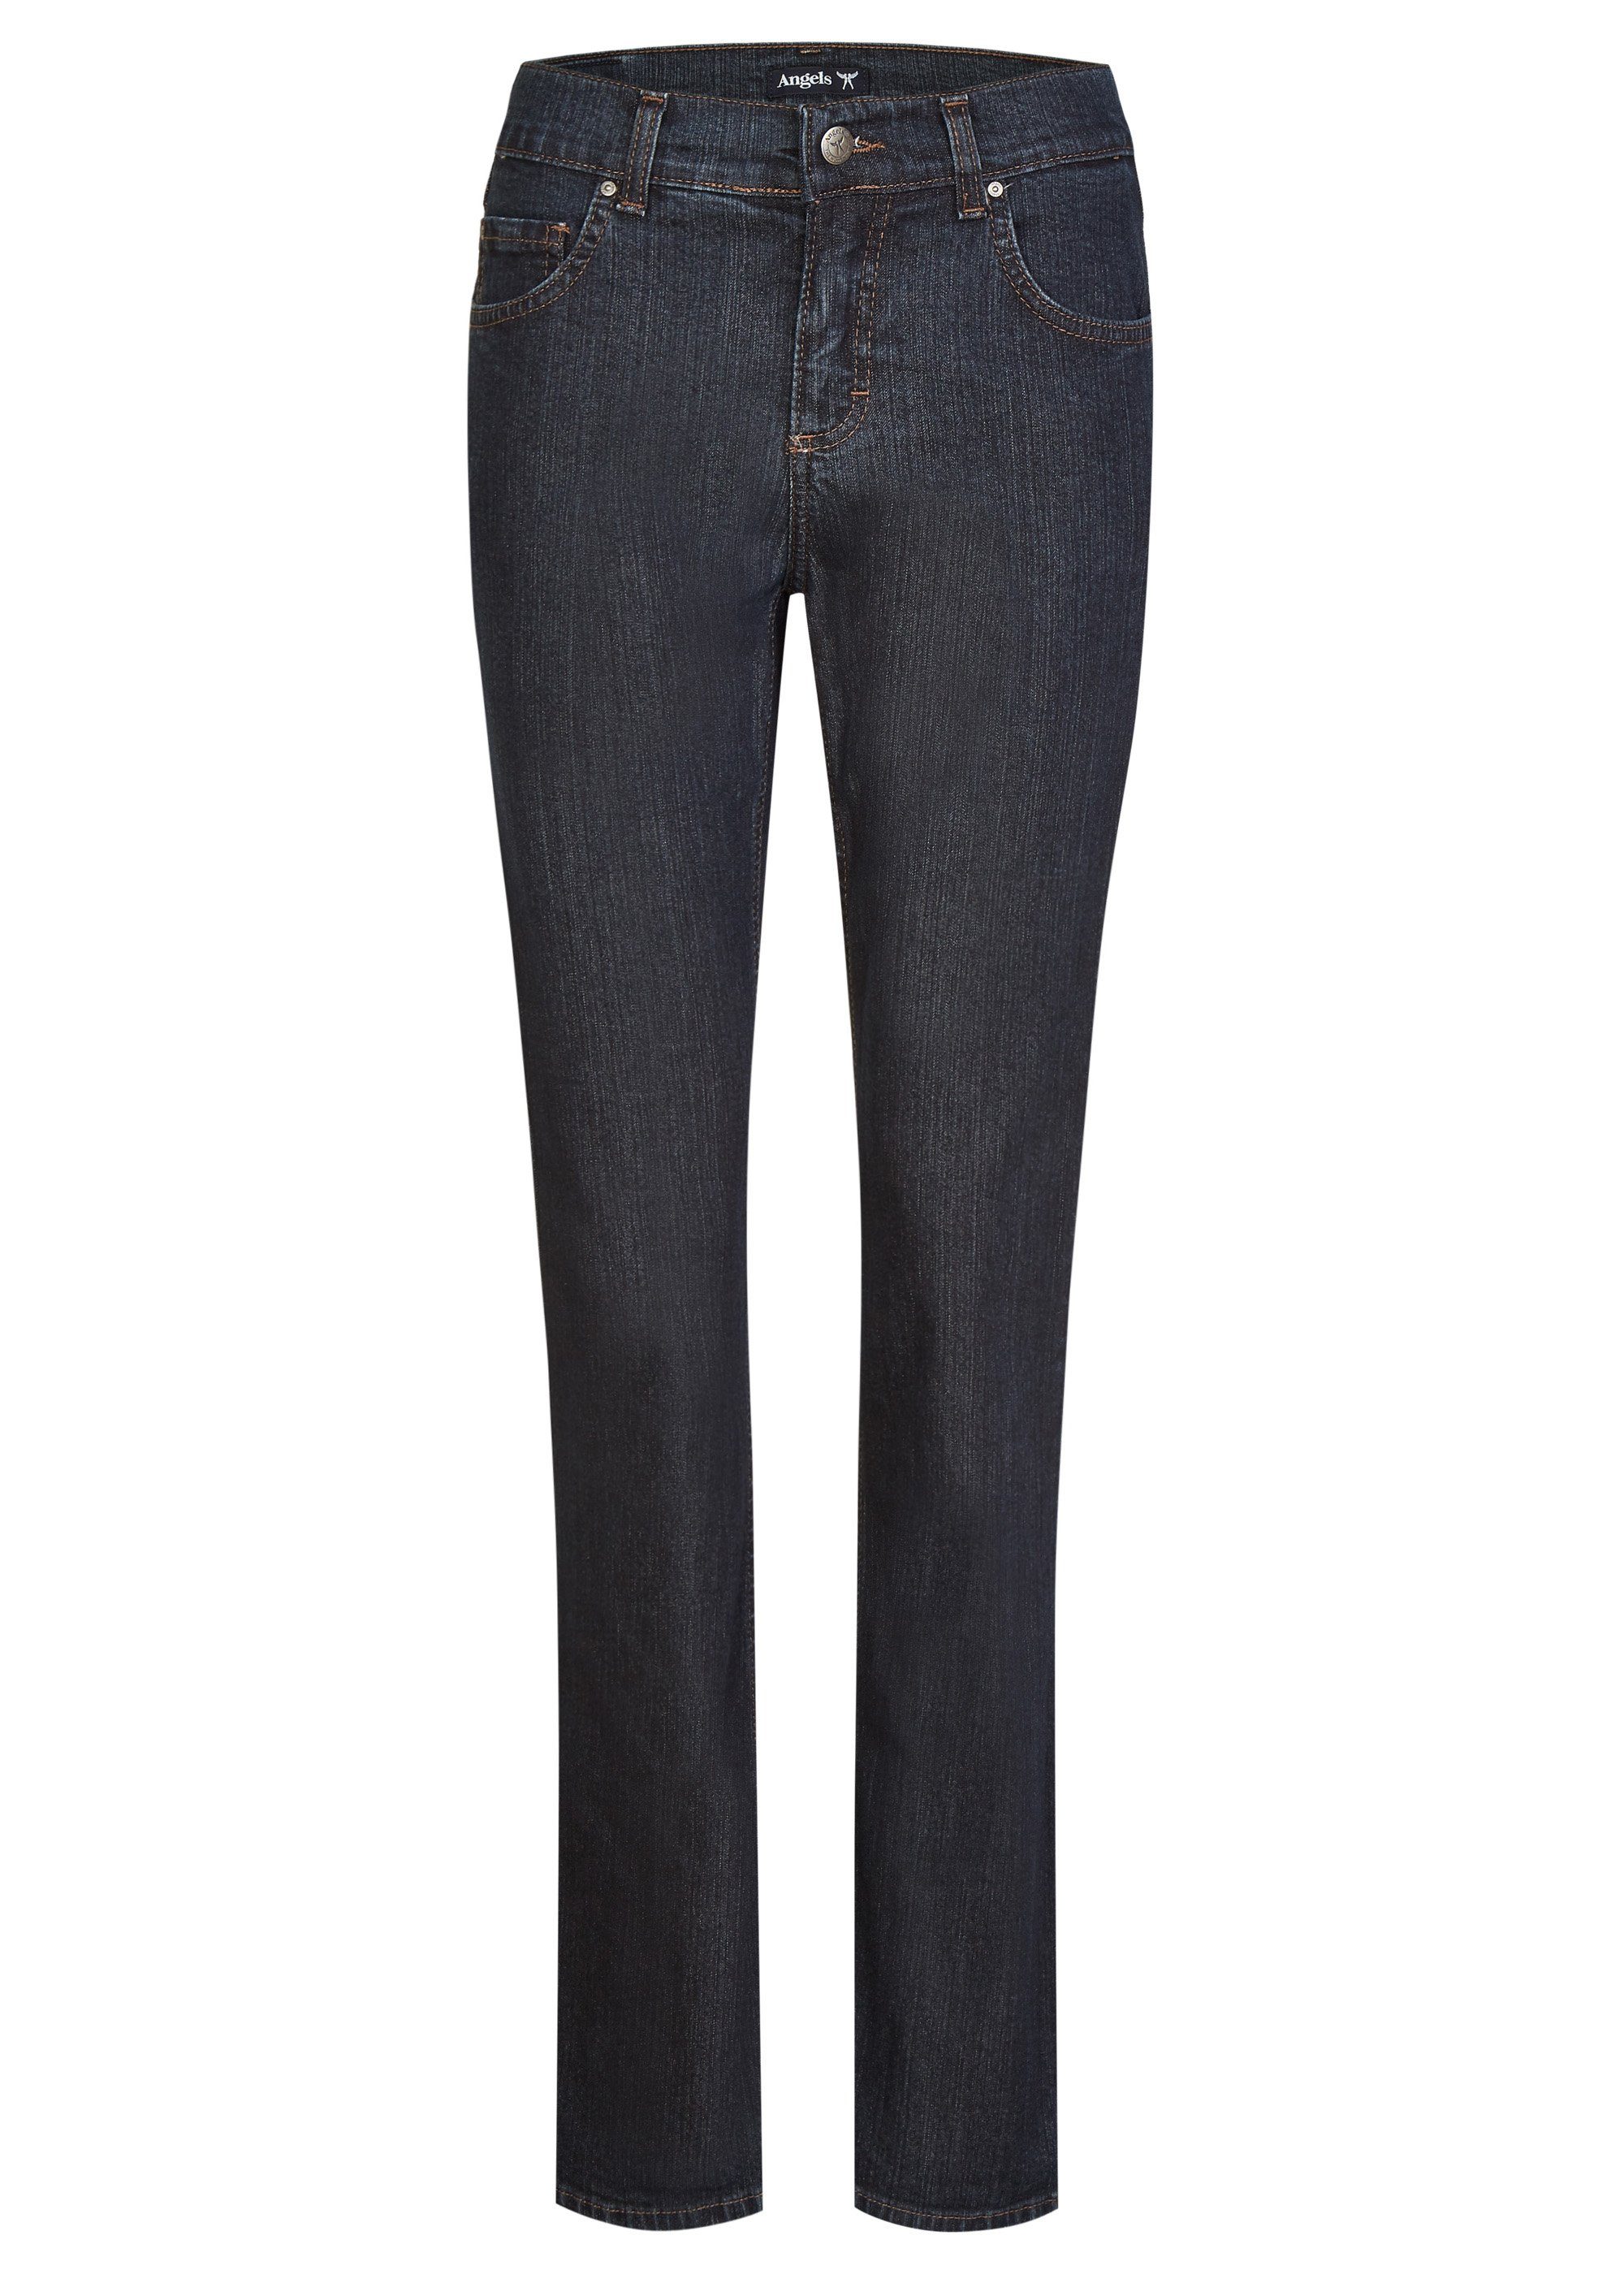 ANGELS Stretch-Jeans ANGELS JEANS LUCI night blue 53 90.30